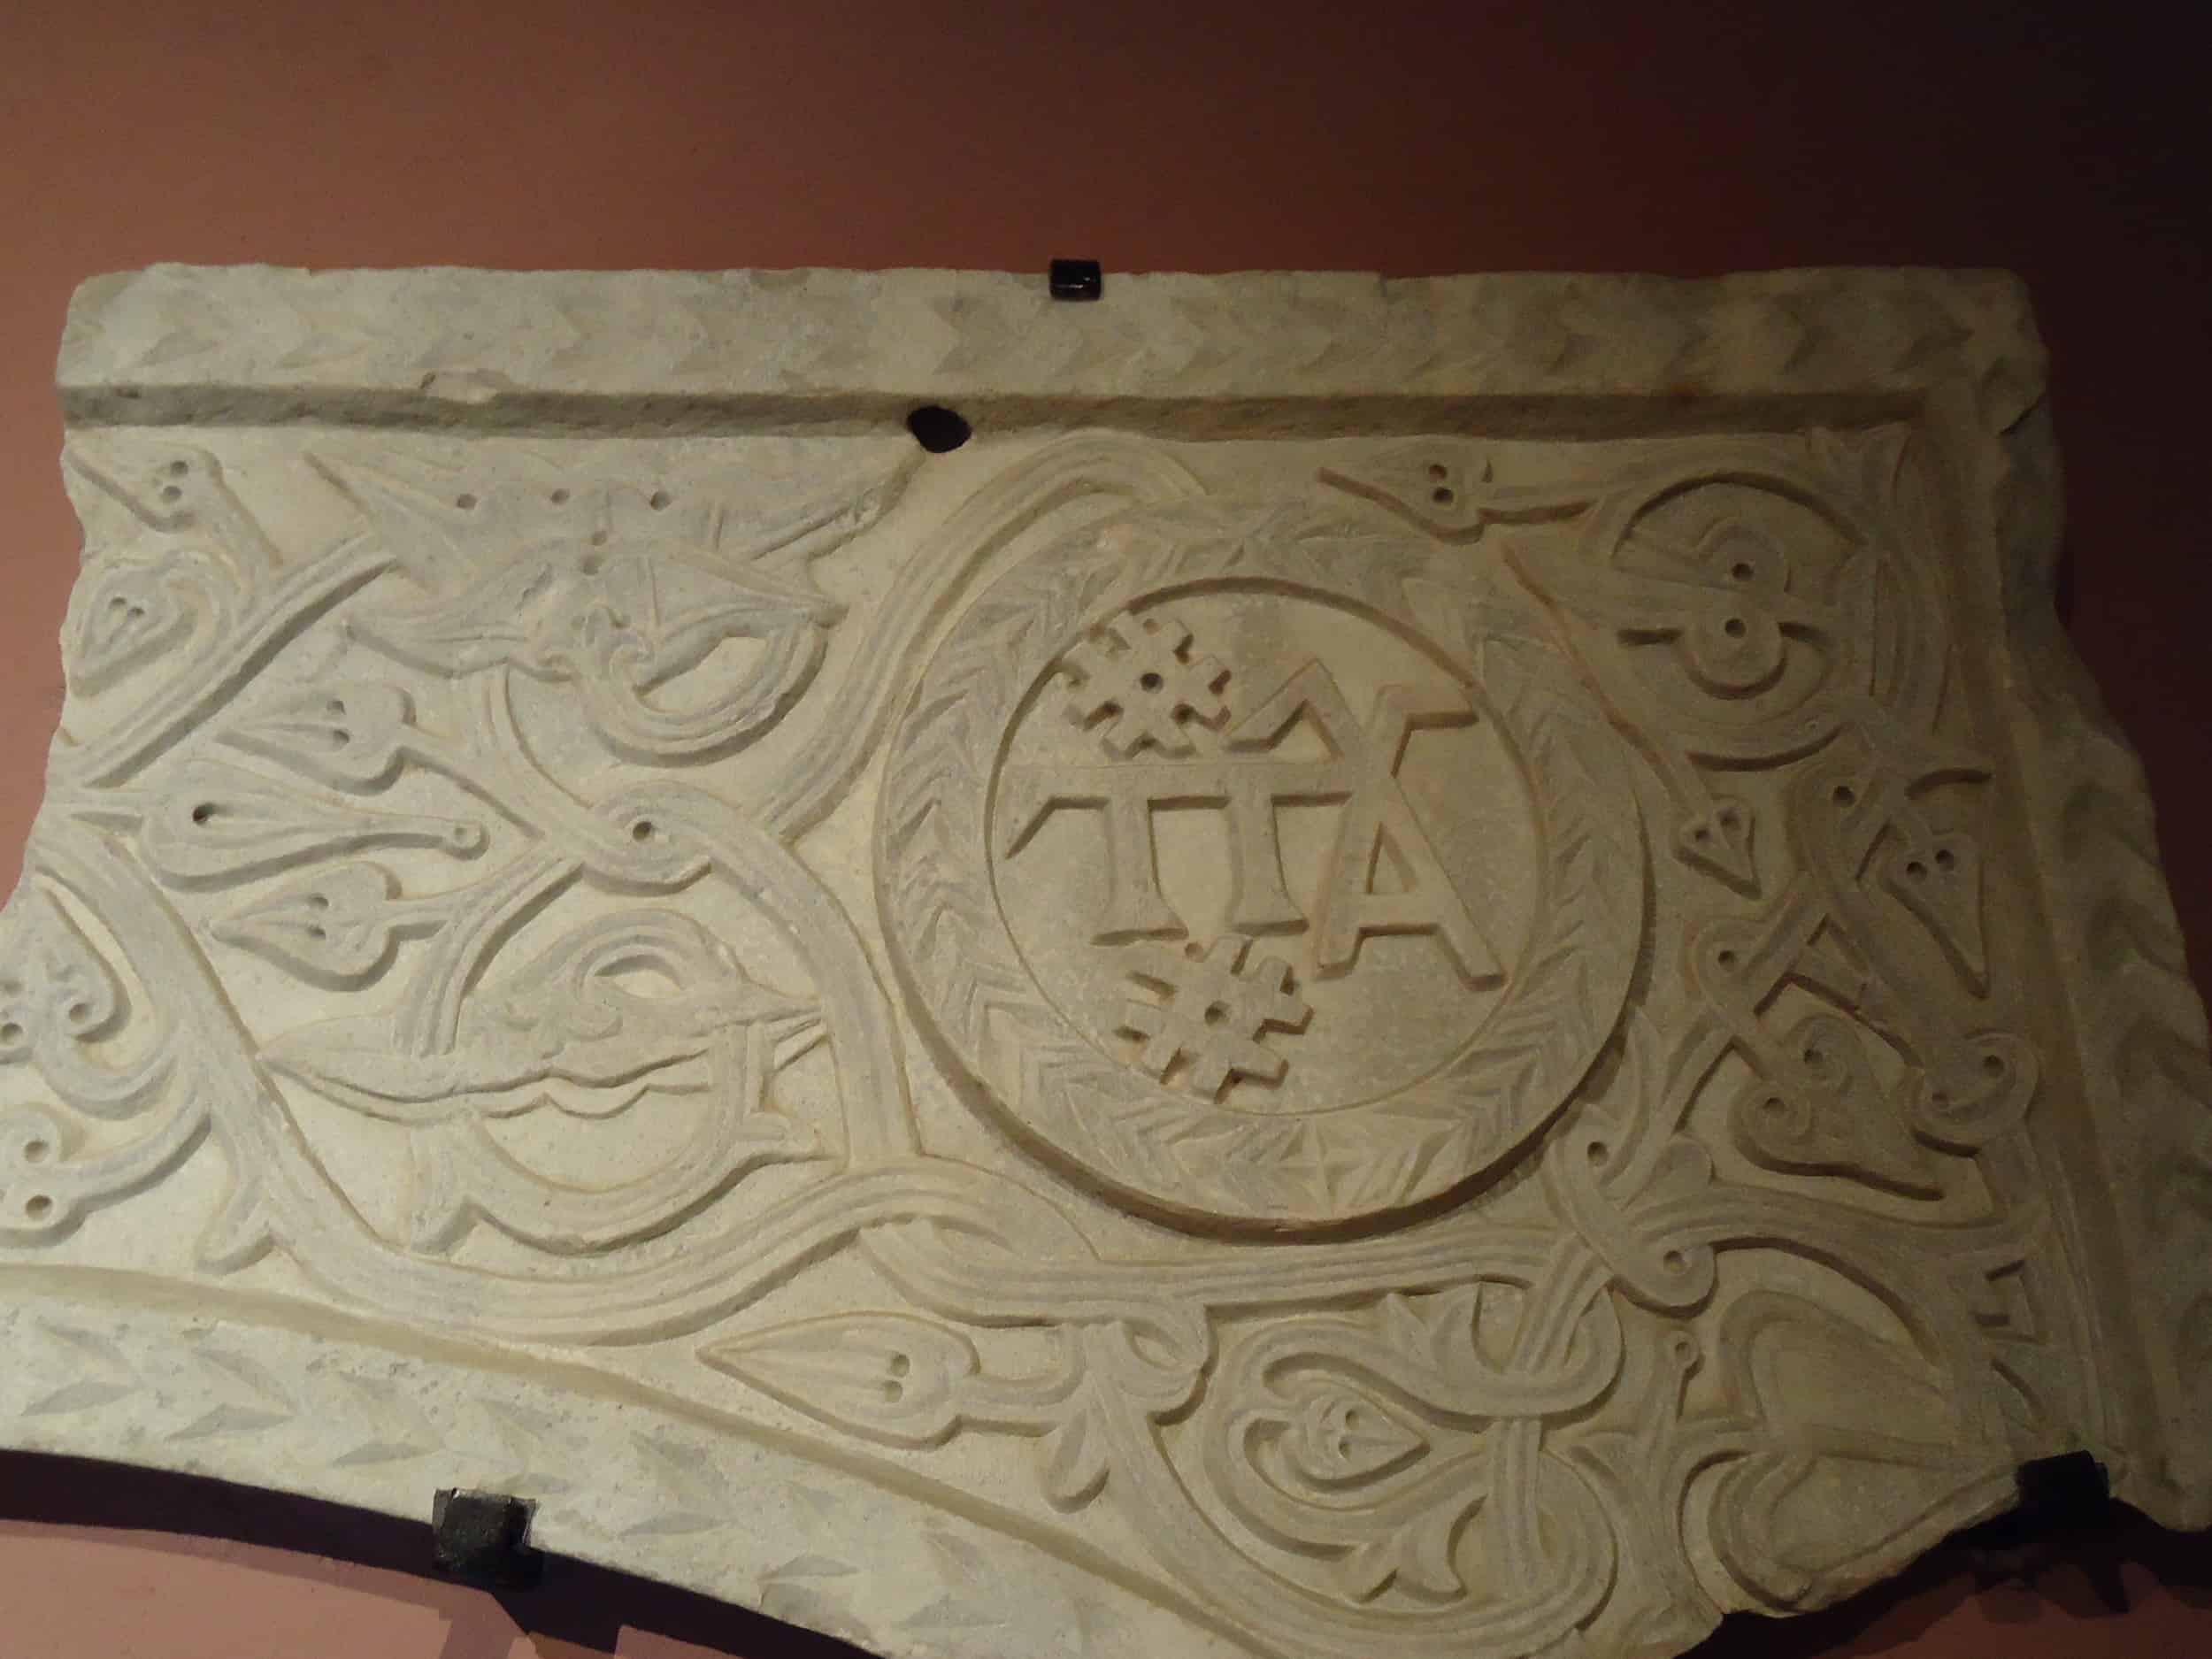 Paleologos seal at the Istanbul Archaeology Museum in Istanbul, Turkey